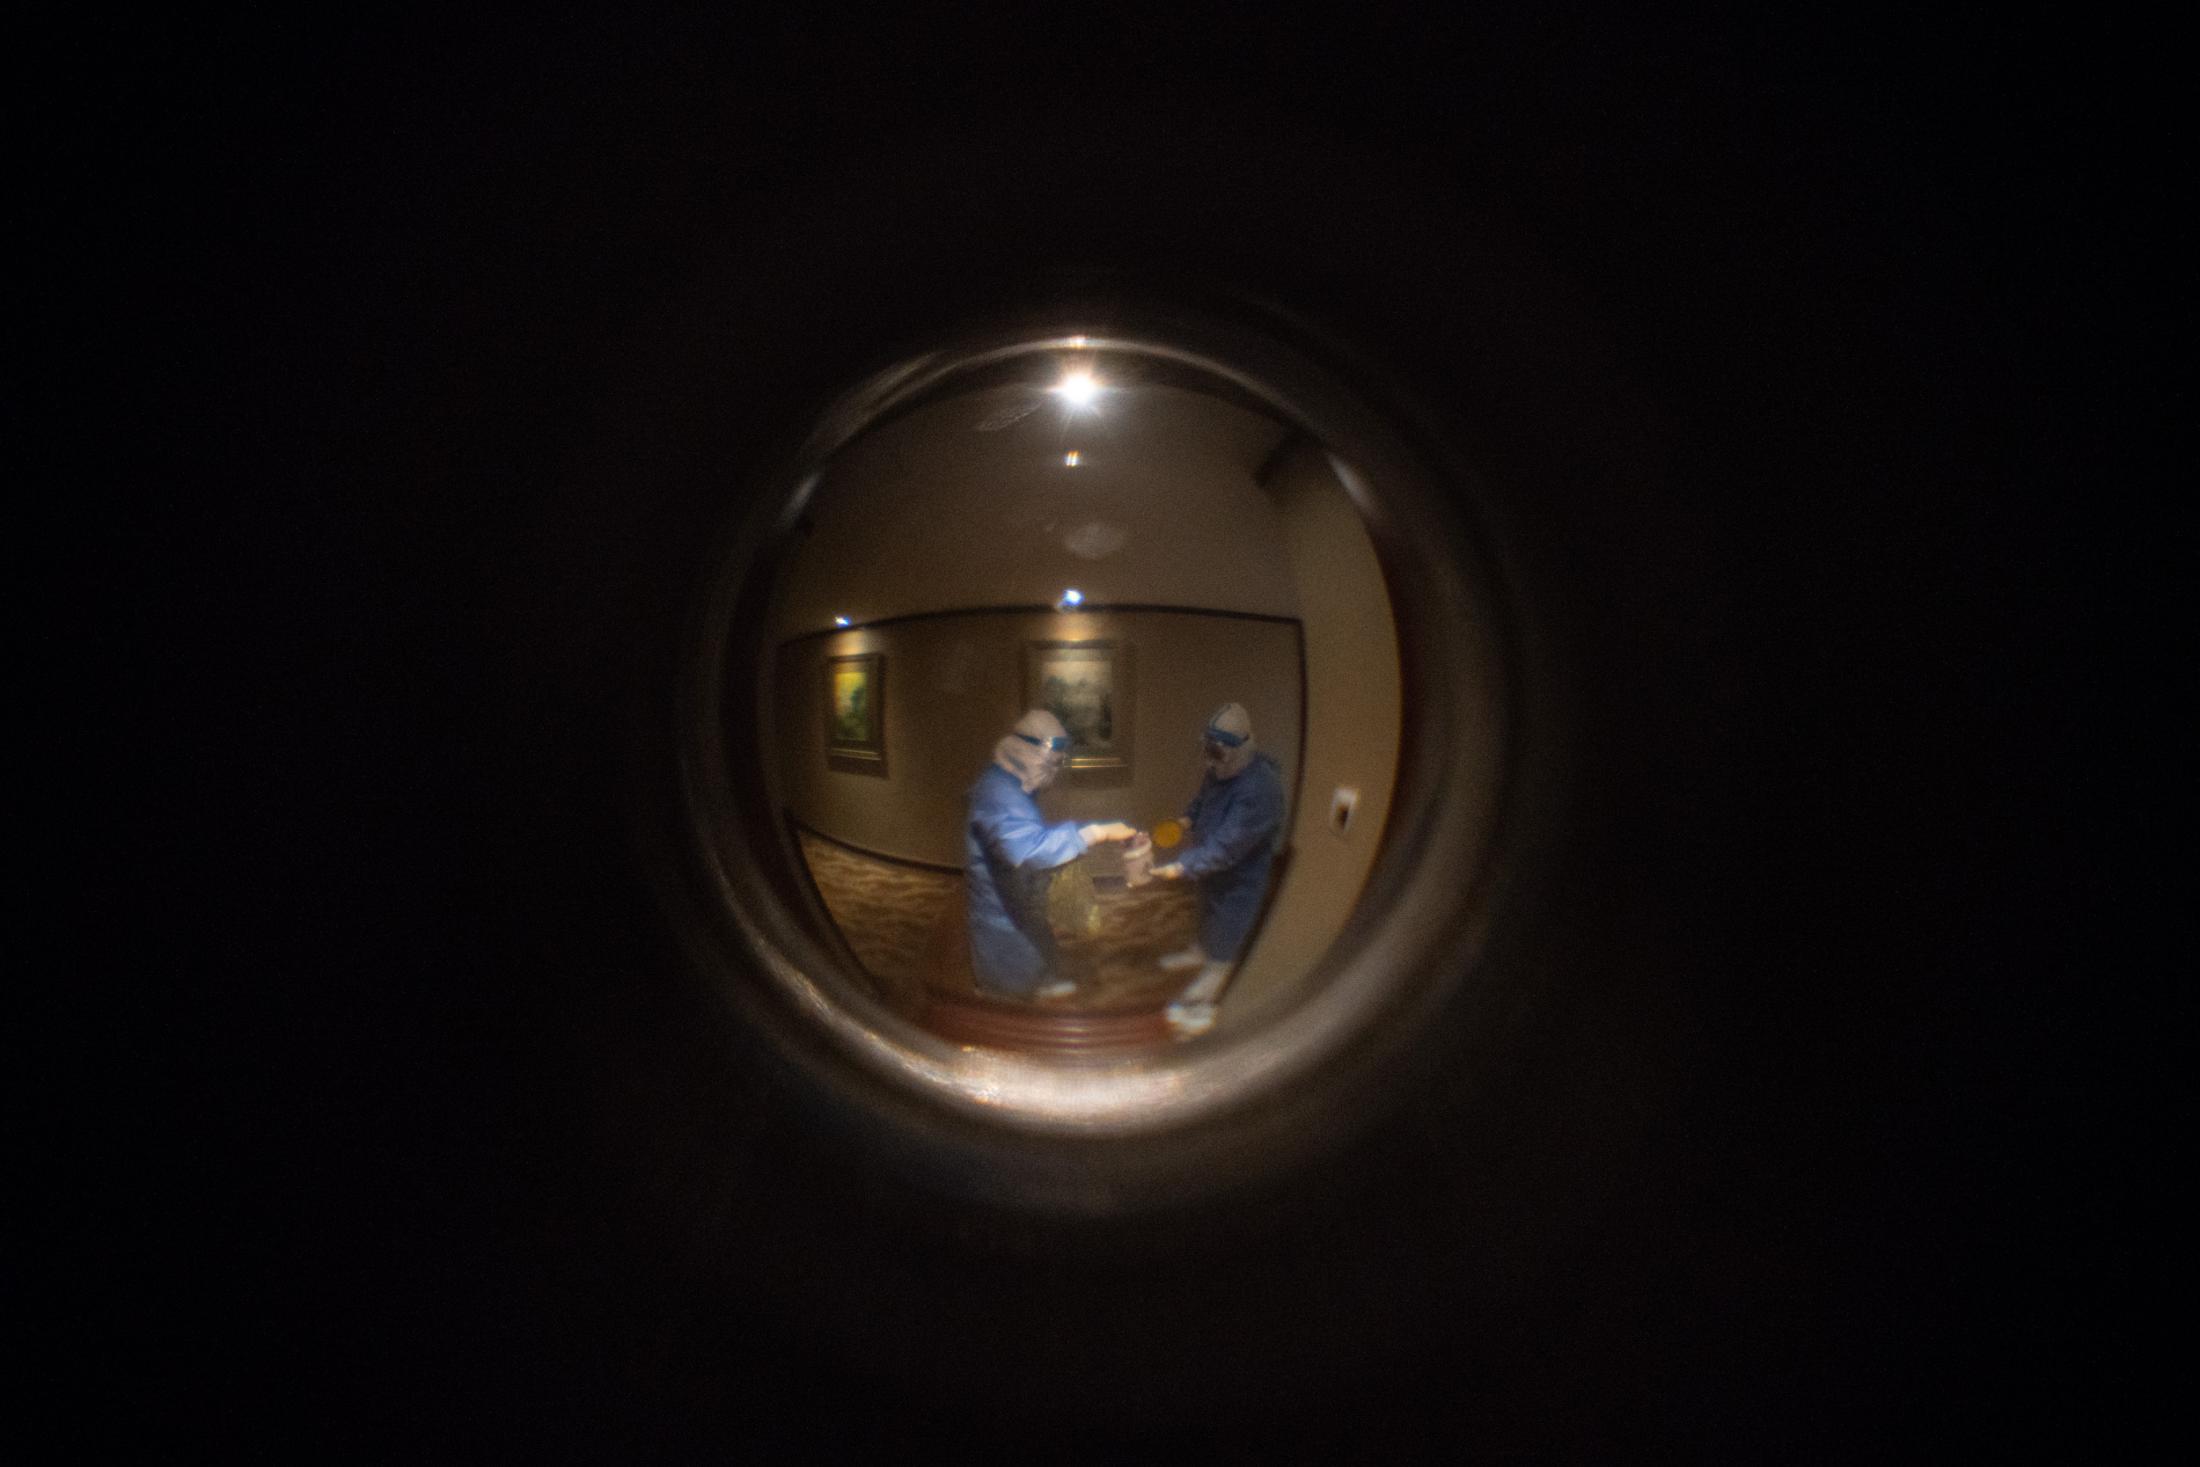 Seen through the peephole: after the COVID-19 test, the two medical workers put my sample into a bag before going to the next room to do the test.